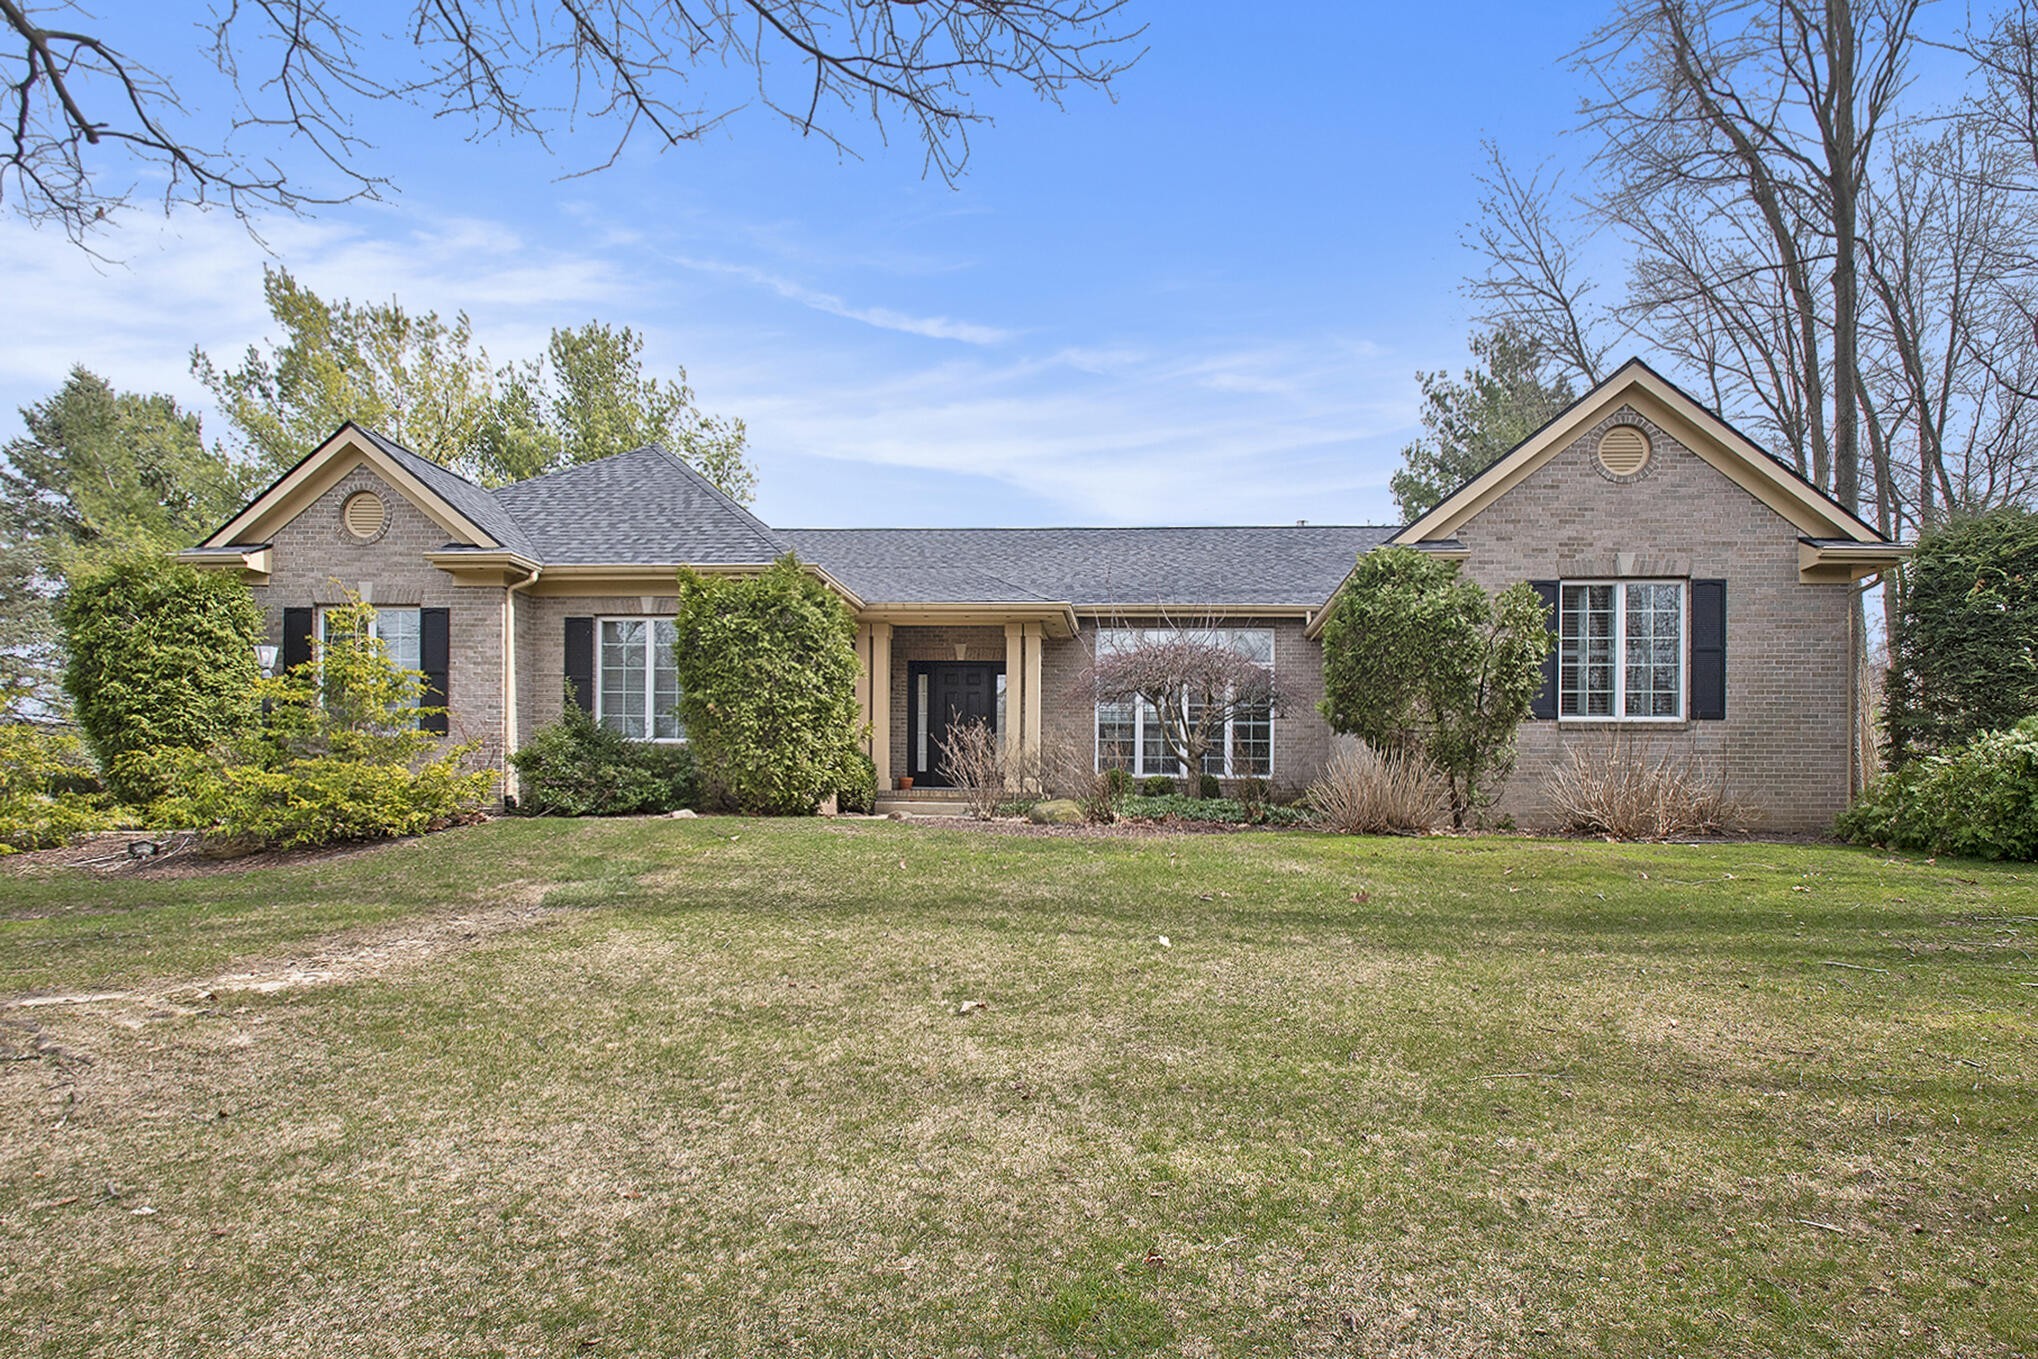 1. 33108 Lake Forest Court